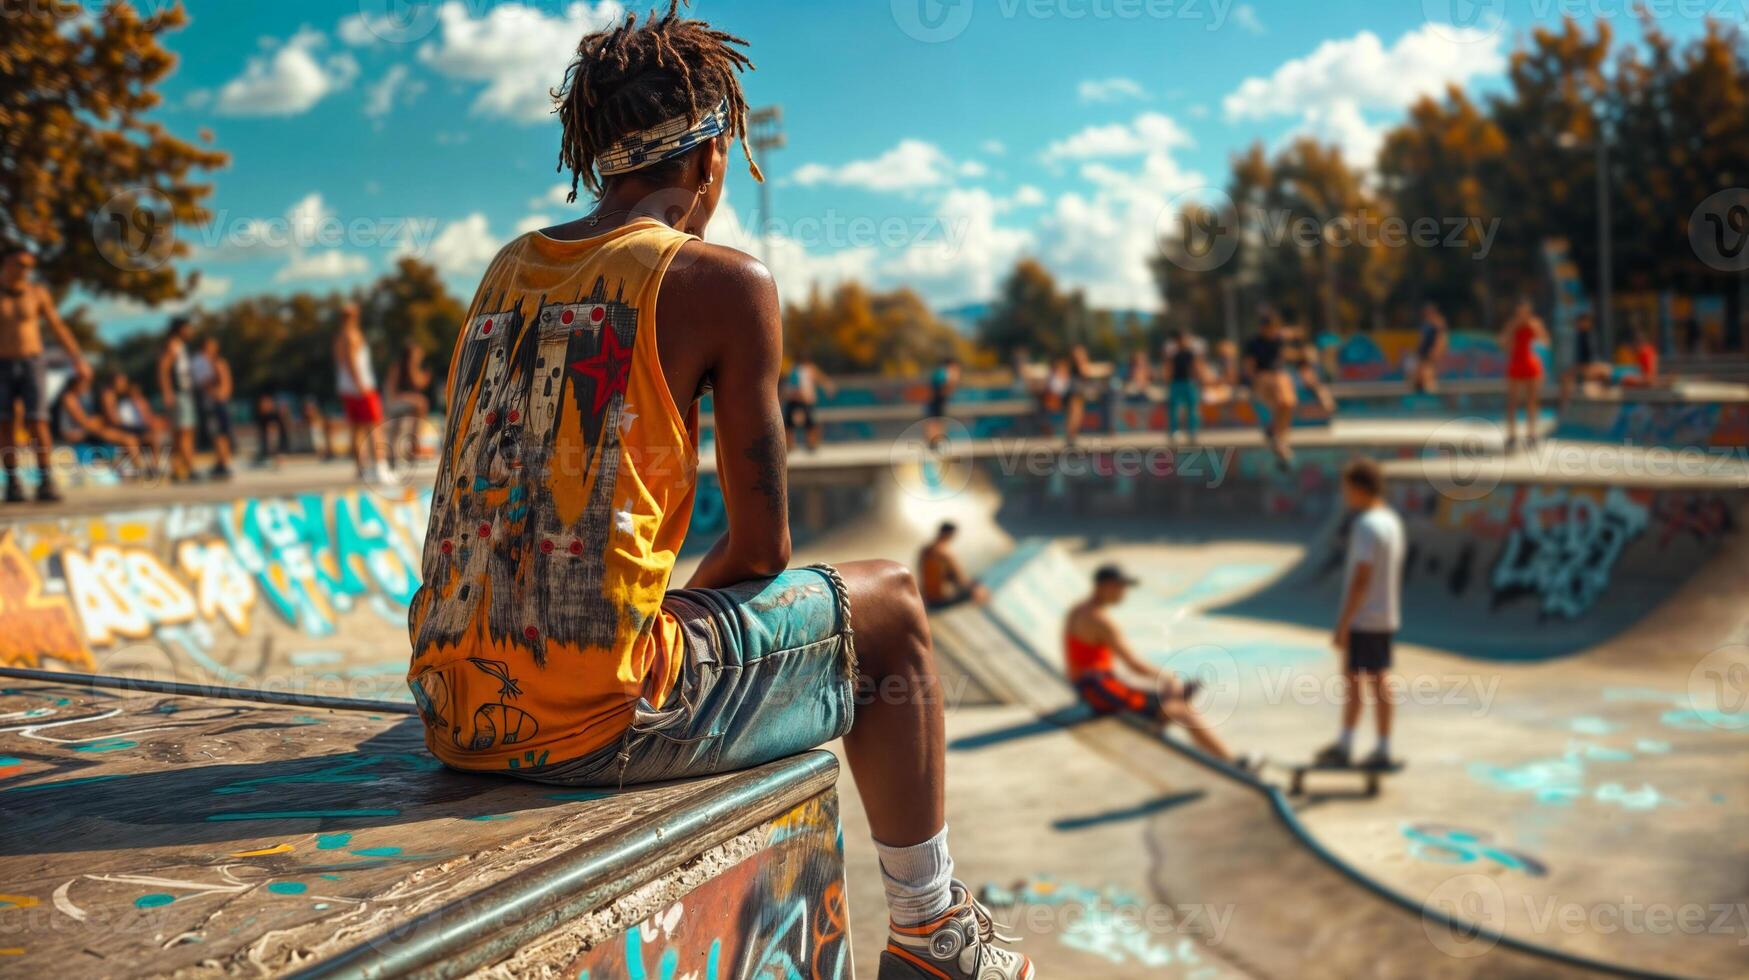 Stylish youth sitting and watching skaters at a sunlit graffiti-decorated skatepark photo